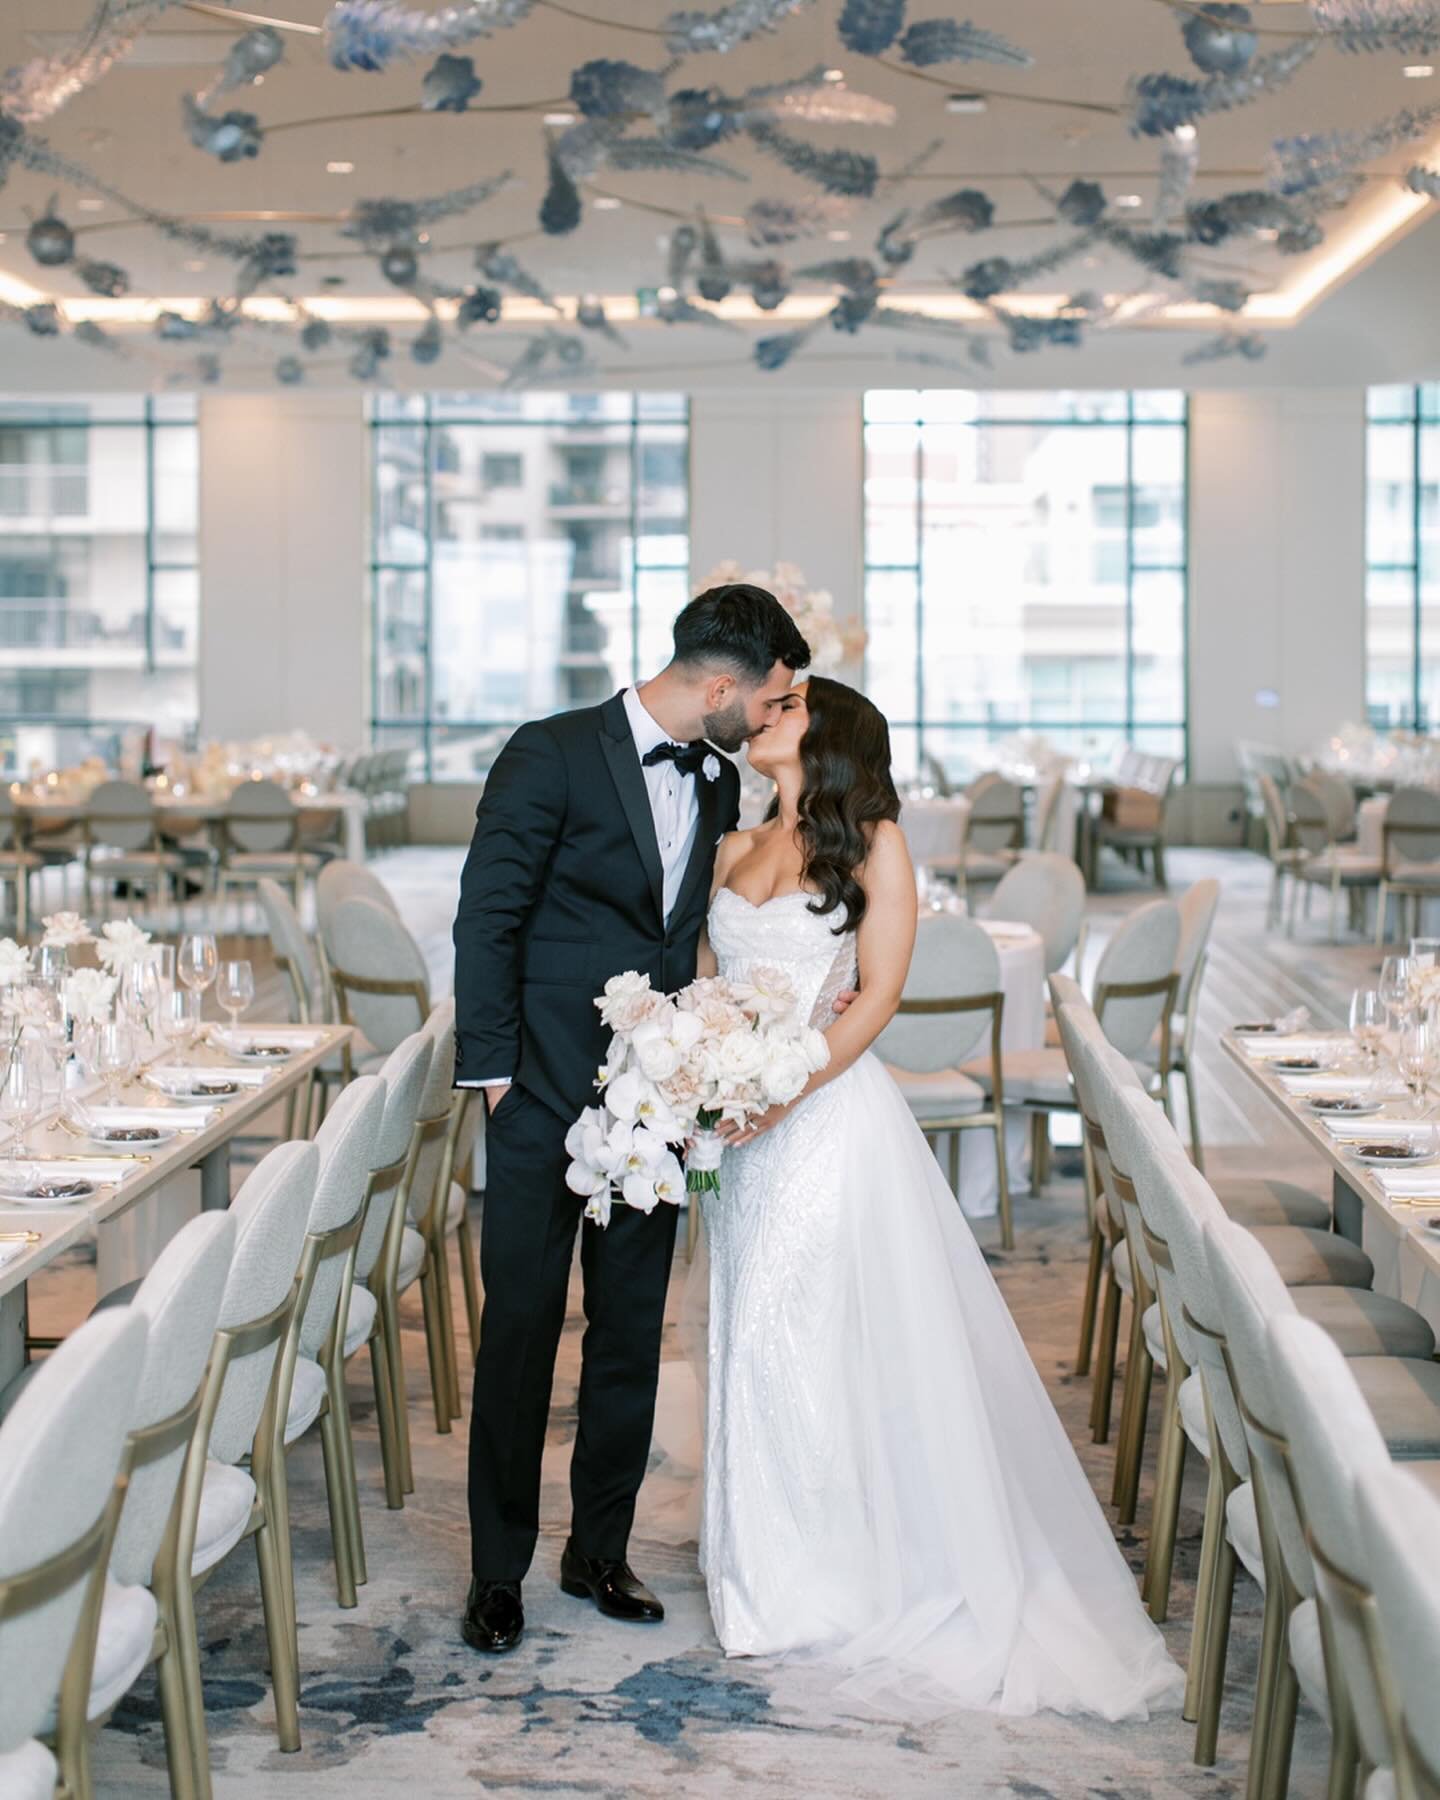 Alexandra + Daniel from this past Saturday✨

This is just a small part of a truly amazing day and I cannot wait to share more🤍

.
.

Planner: @claudiacoleevents 
Venue: @thepearlehotel 
Video: @ill_productions_ 
Floral: @simplyelegantbyemma 
Bridal: